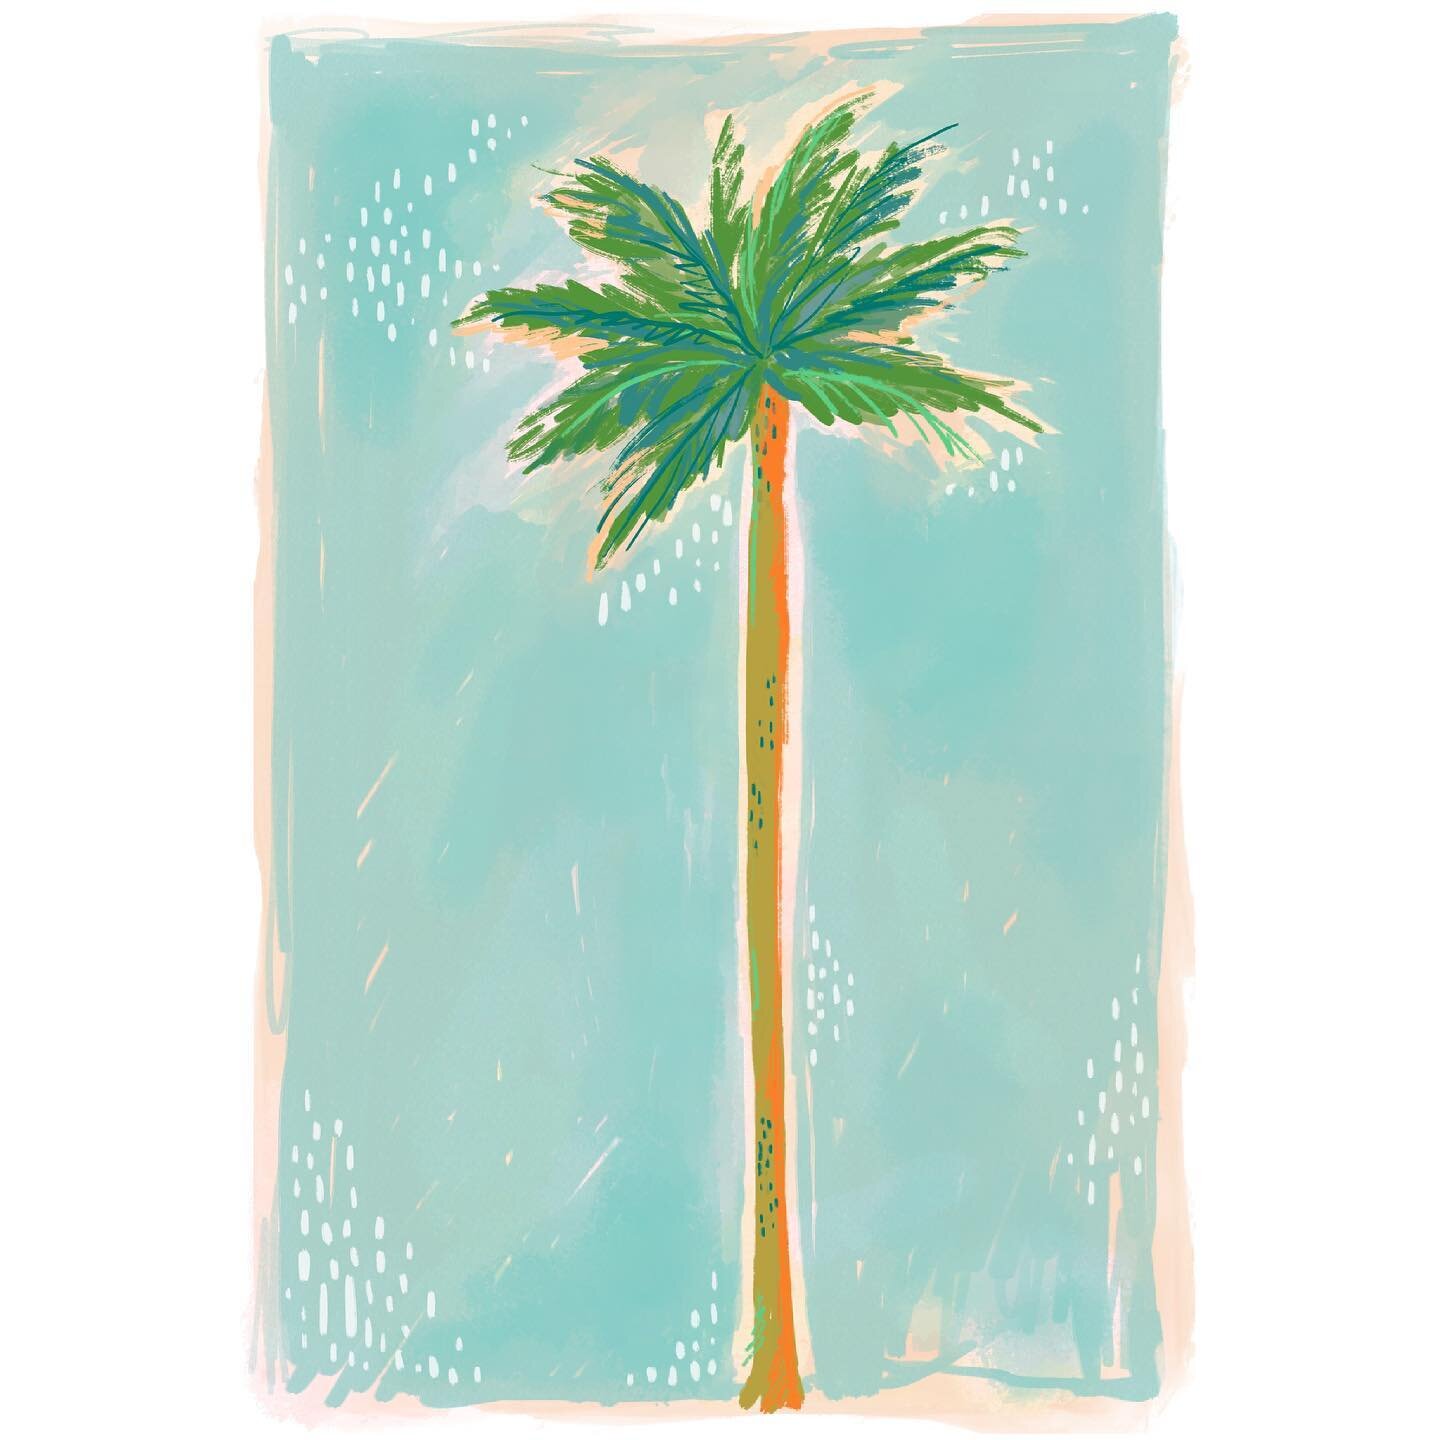 Back on the tropical sketching grind... I&rsquo;ve been busy with client work and moving to a new house! And when you can&rsquo;t find prints to adorn the walls, you make your own!